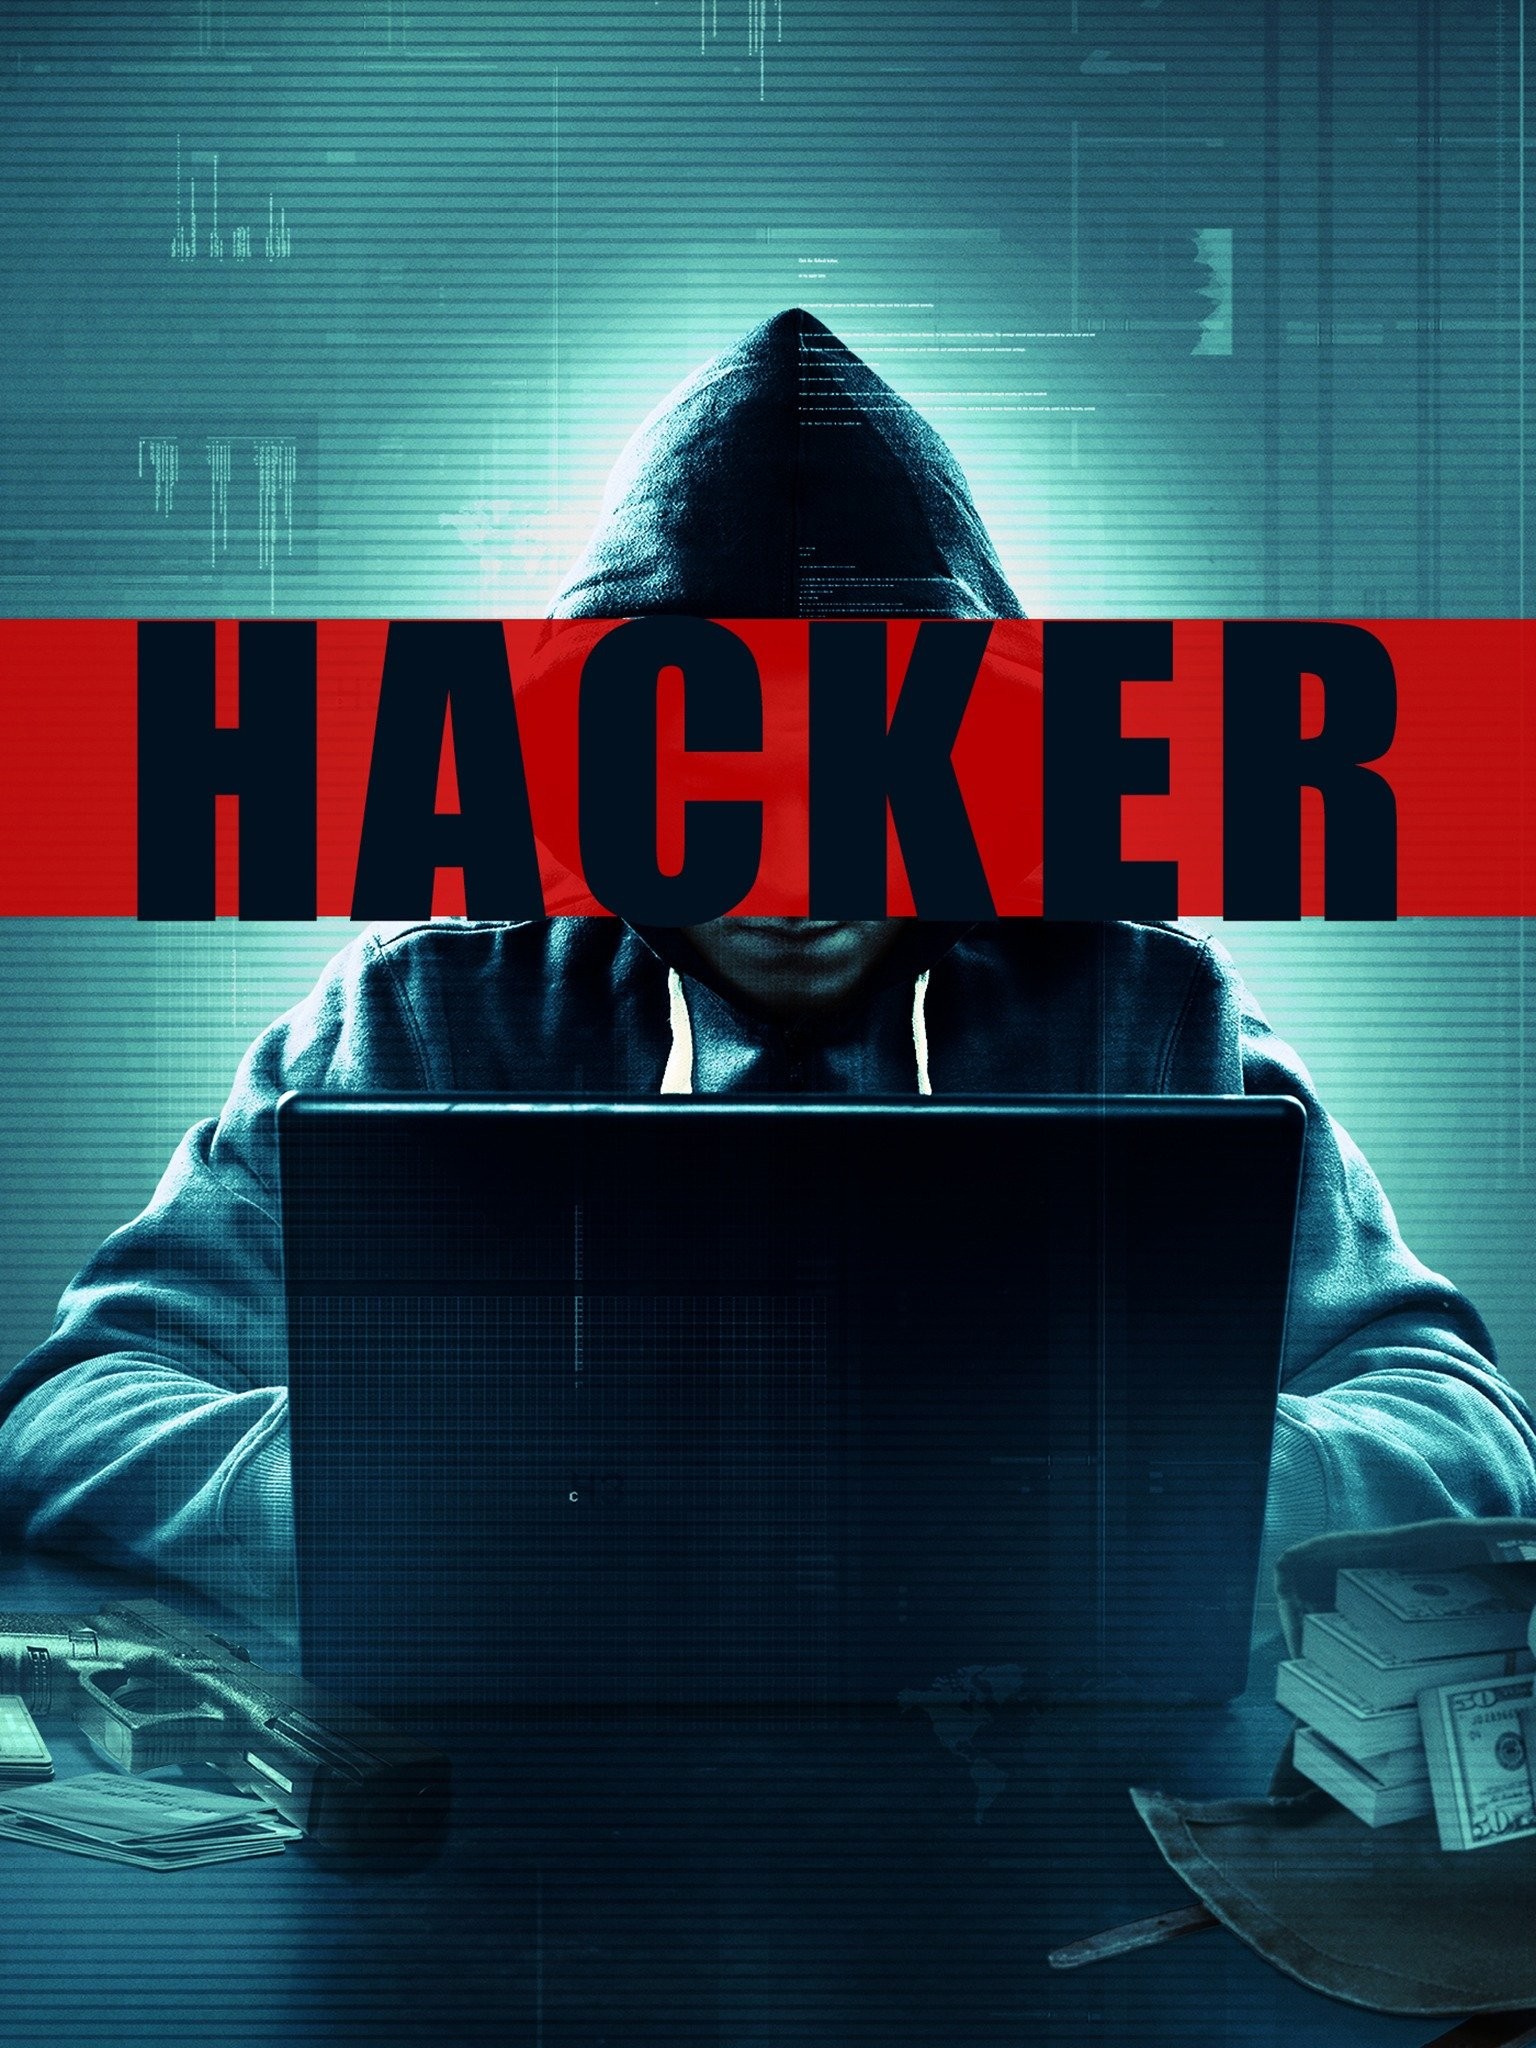 Hacker Photos and Images